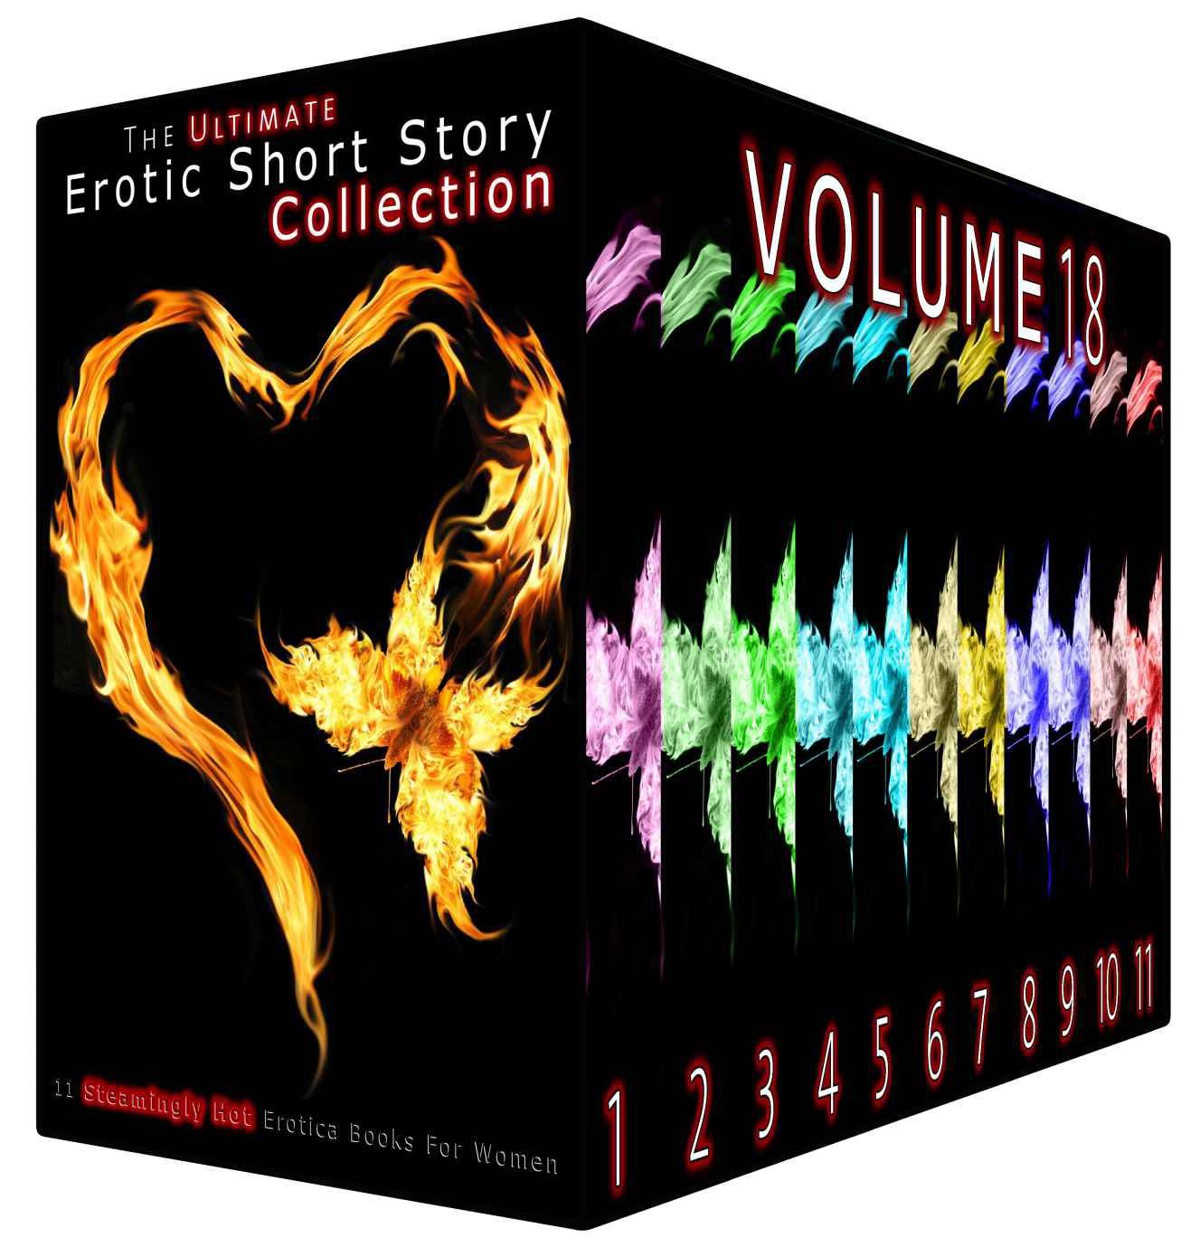 The Ultimate Erotic Short Story Collection 18